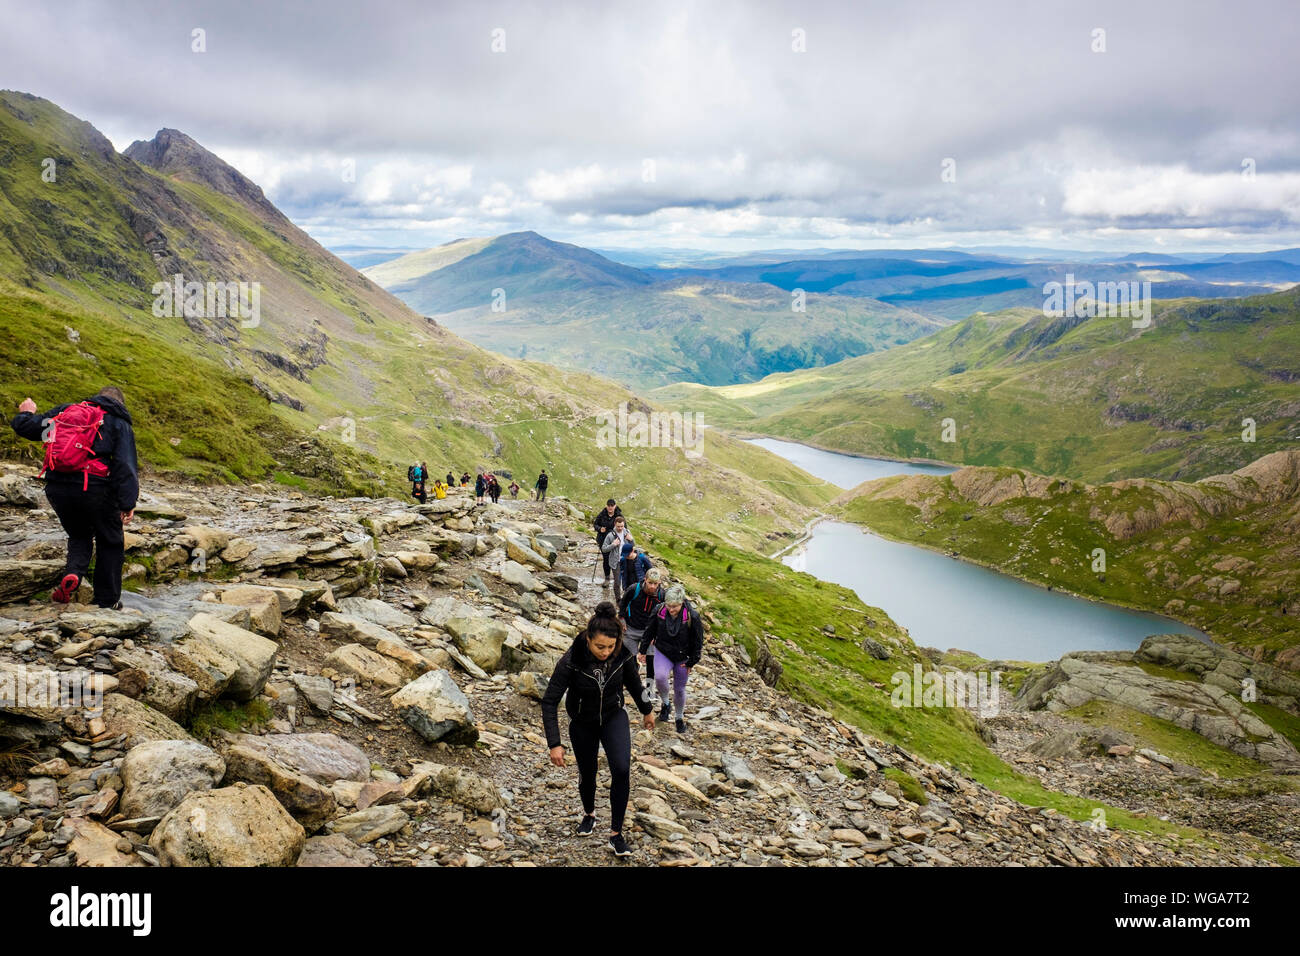 People walking up worn eroded Pyg Track busy route to Mt Snowdon above Glaslyn in mountains of Snowdonia National Park. Llanberis Gwynedd Wales UK Stock Photo